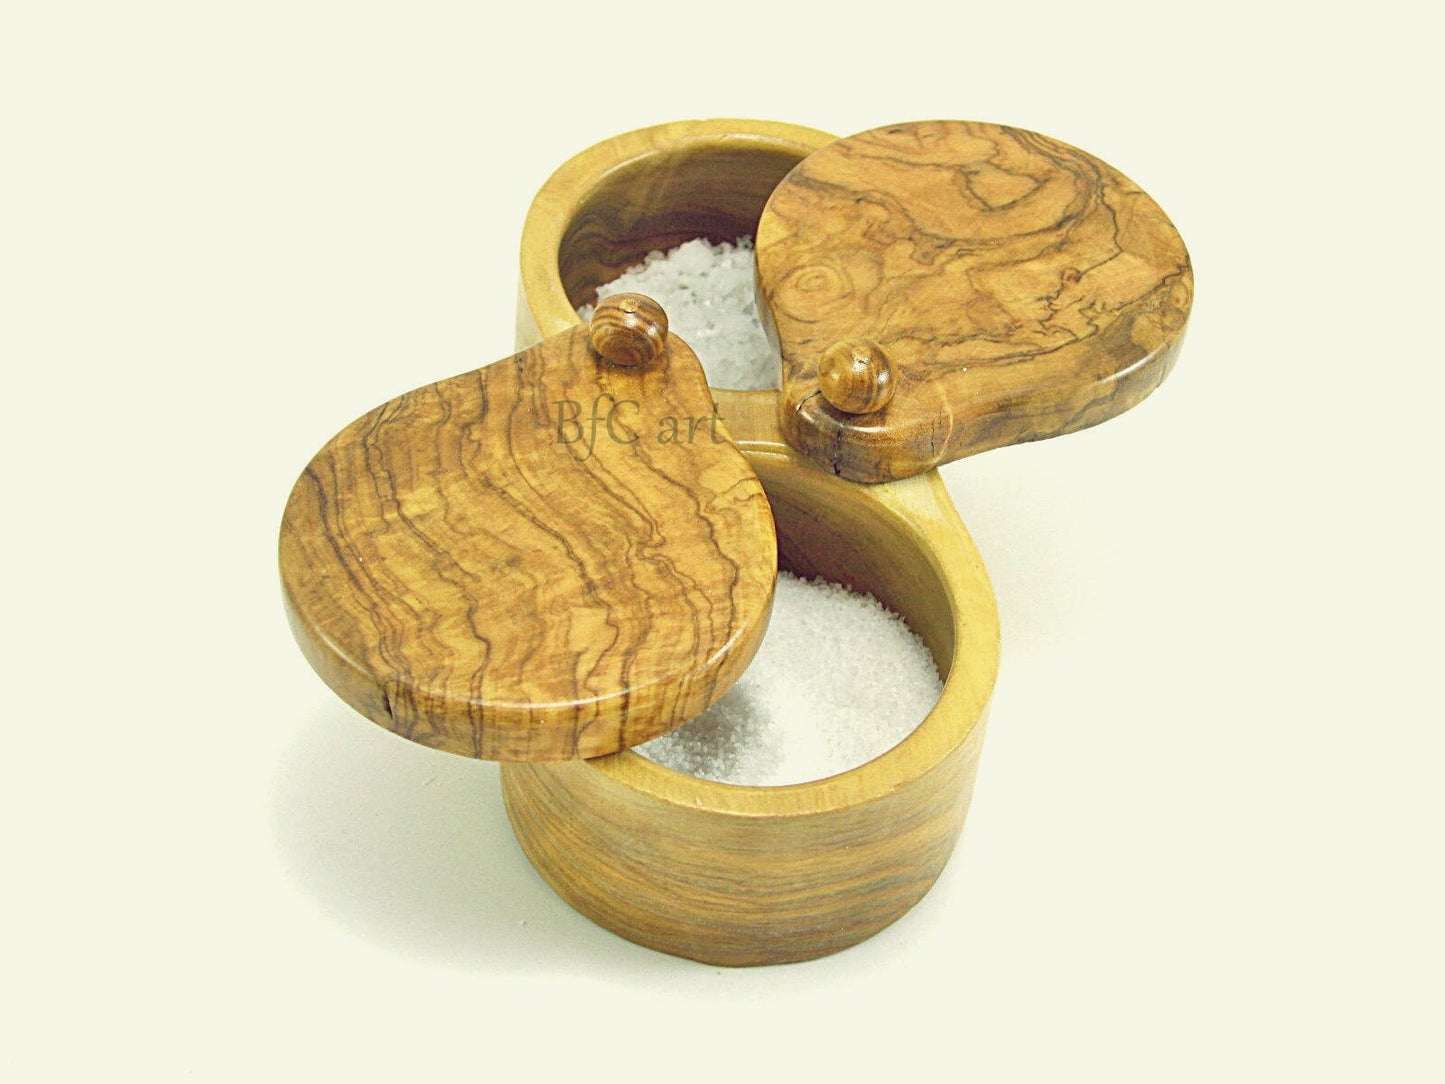 Double capacity wooden salt shaker, Salt Container with Lid, Salt Shaker For Fine and Coarse Salt, Wooden Table Salt Shaker, Salt and Sugar